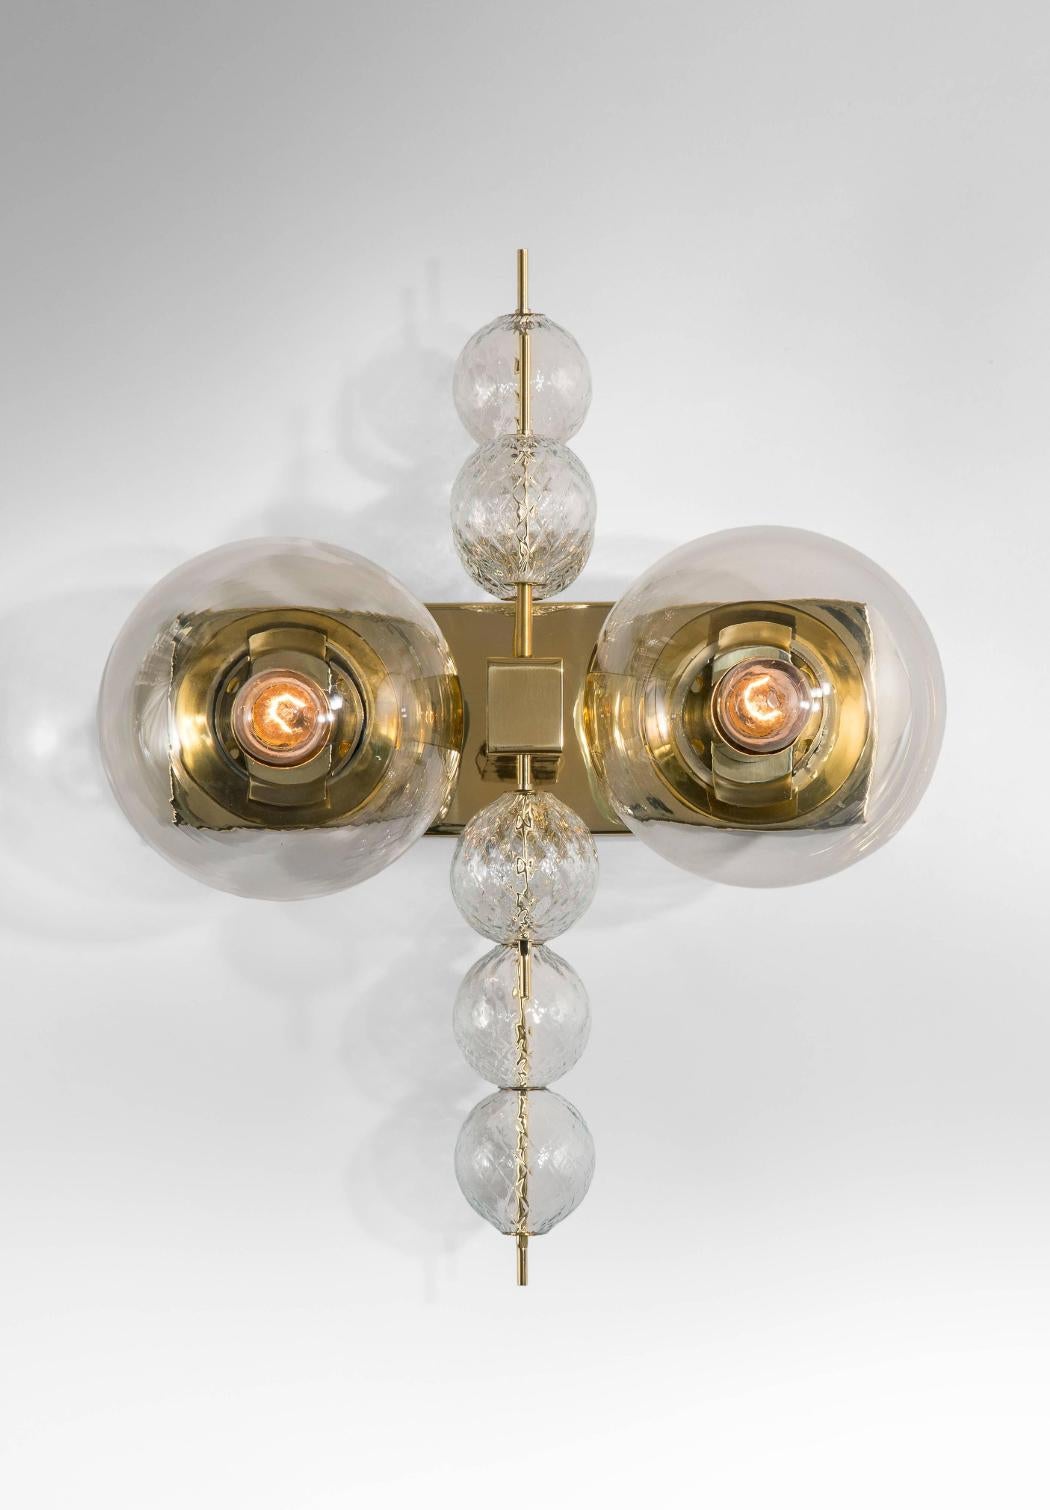 Mid-Century Modern Midcentury Hotel Wall Chandelier with Brass Fixture, European, 1970s For Sale